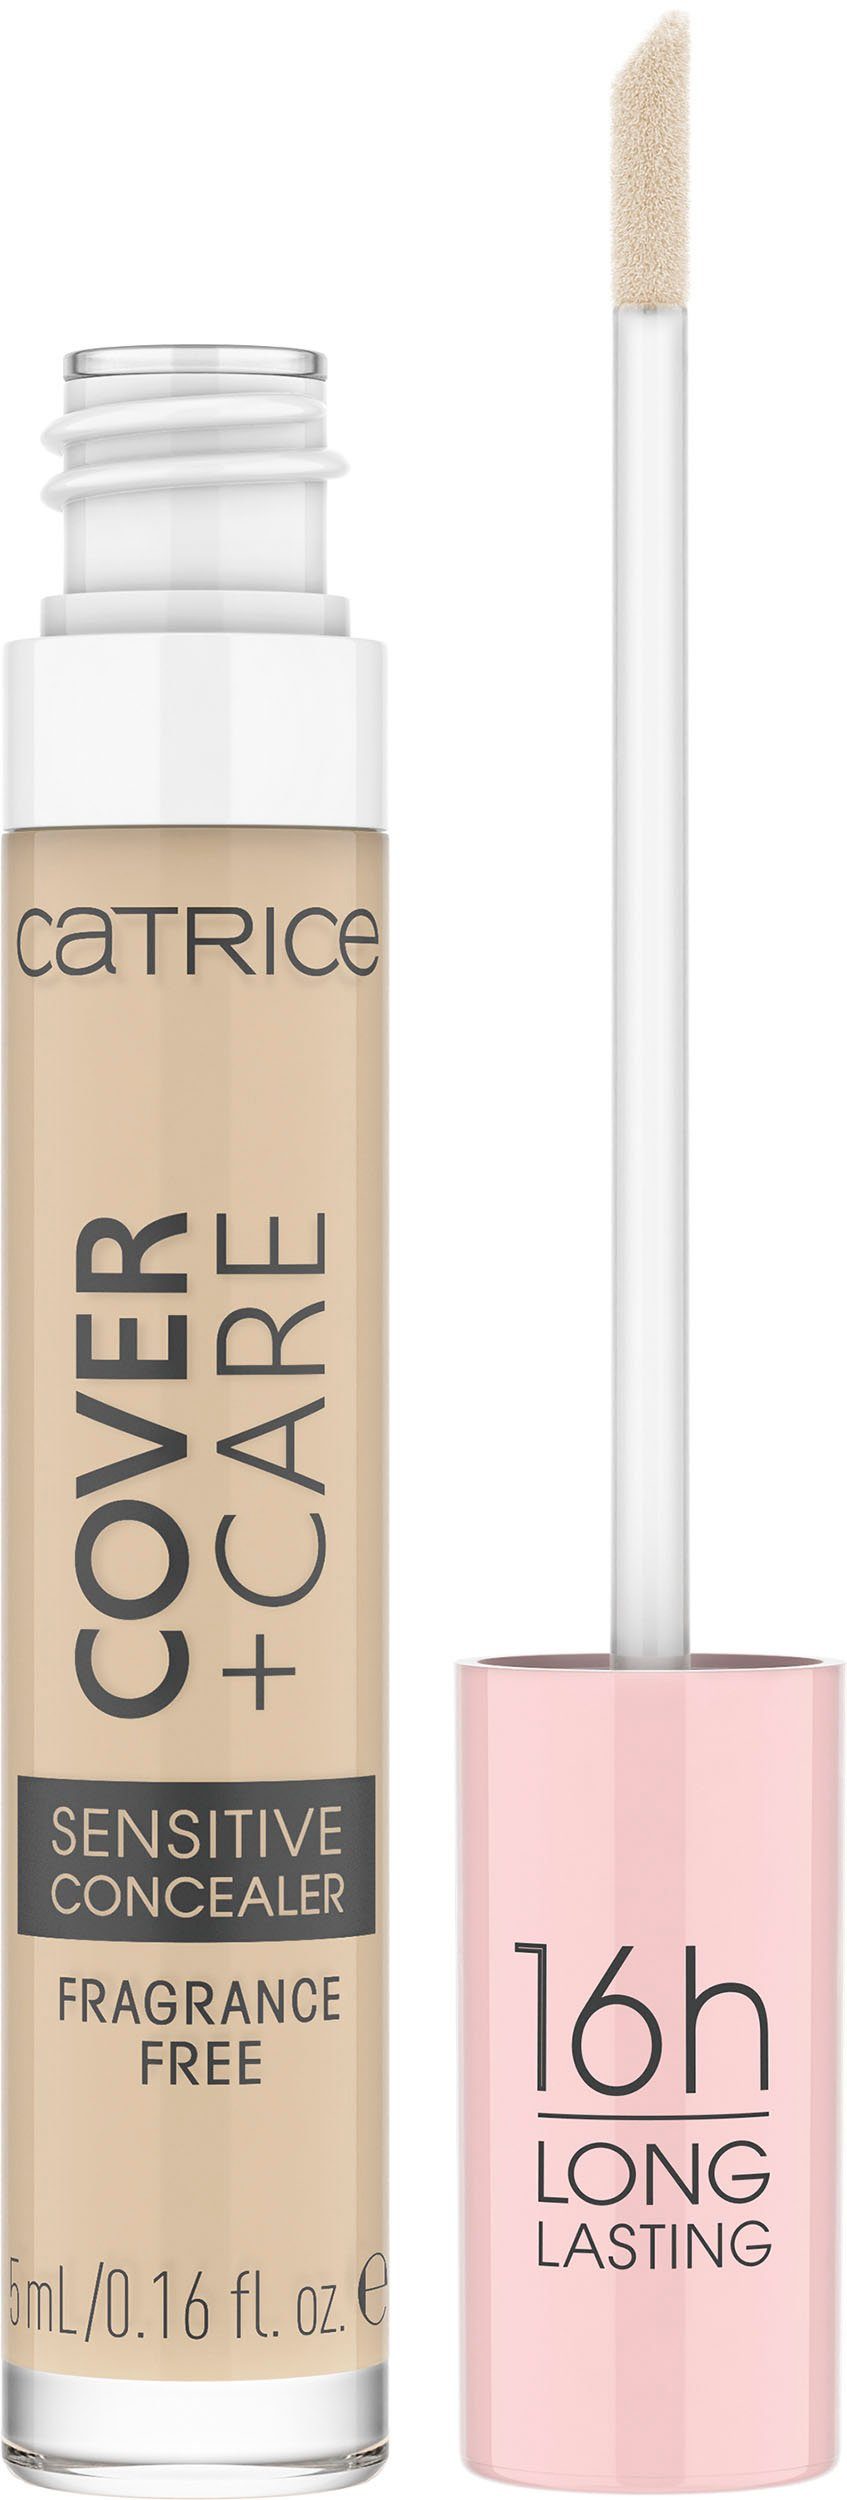 nude Concealer, Catrice + Sensitive Care Concealer Cover 010C 3-tlg. Catrice